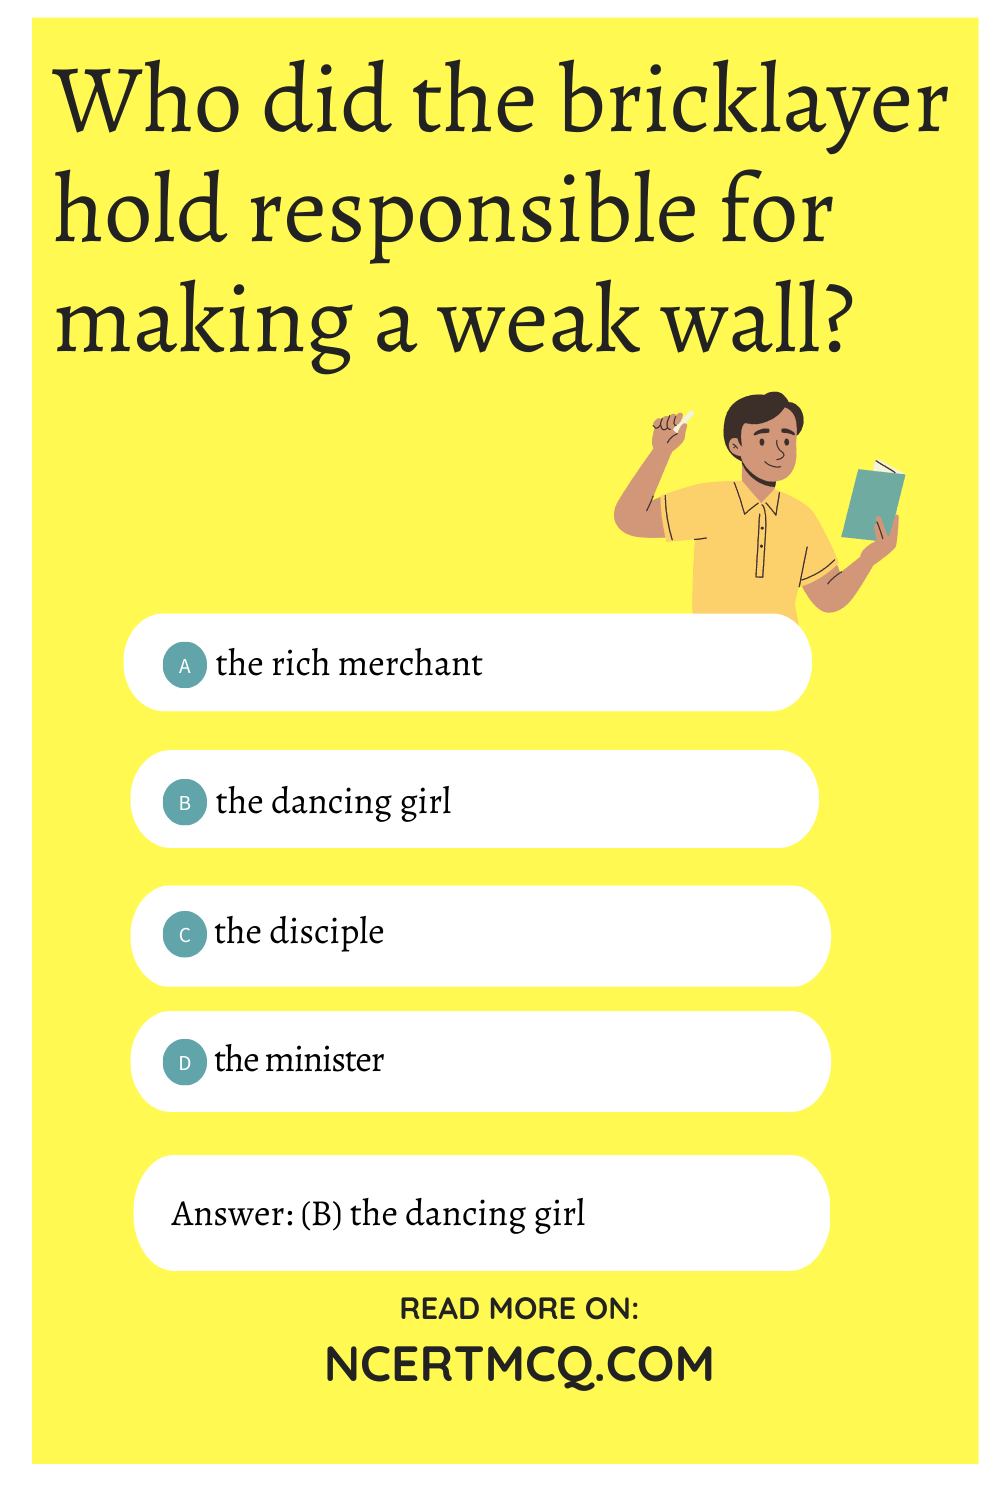 Who did the bricklayer hold responsible for making a weak wall?